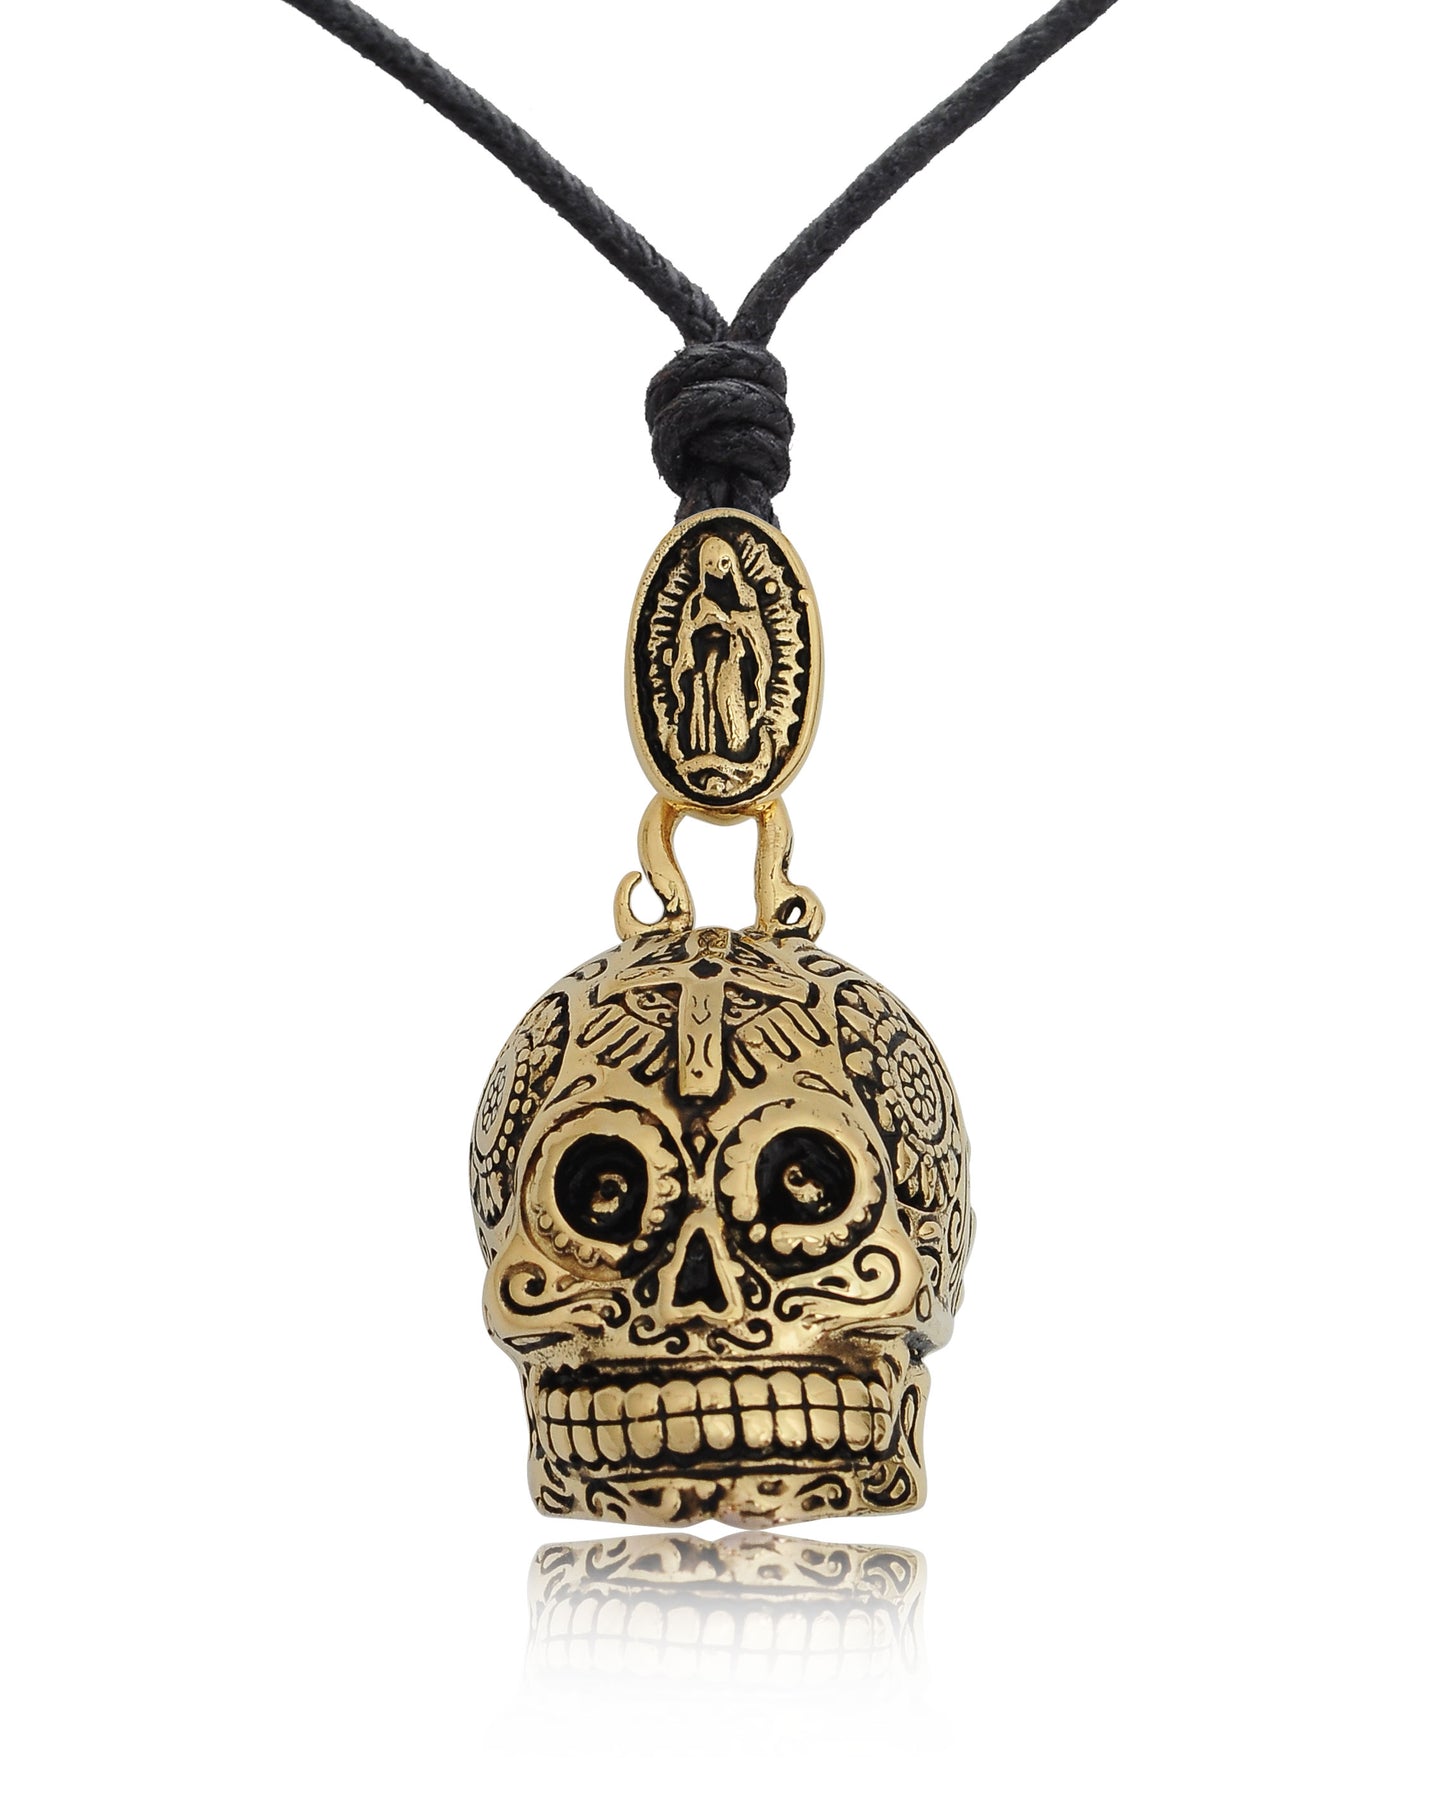 New Mexican Skull Cross Jesus Mary Gold Brass Charm Necklace Pendant Jewelry